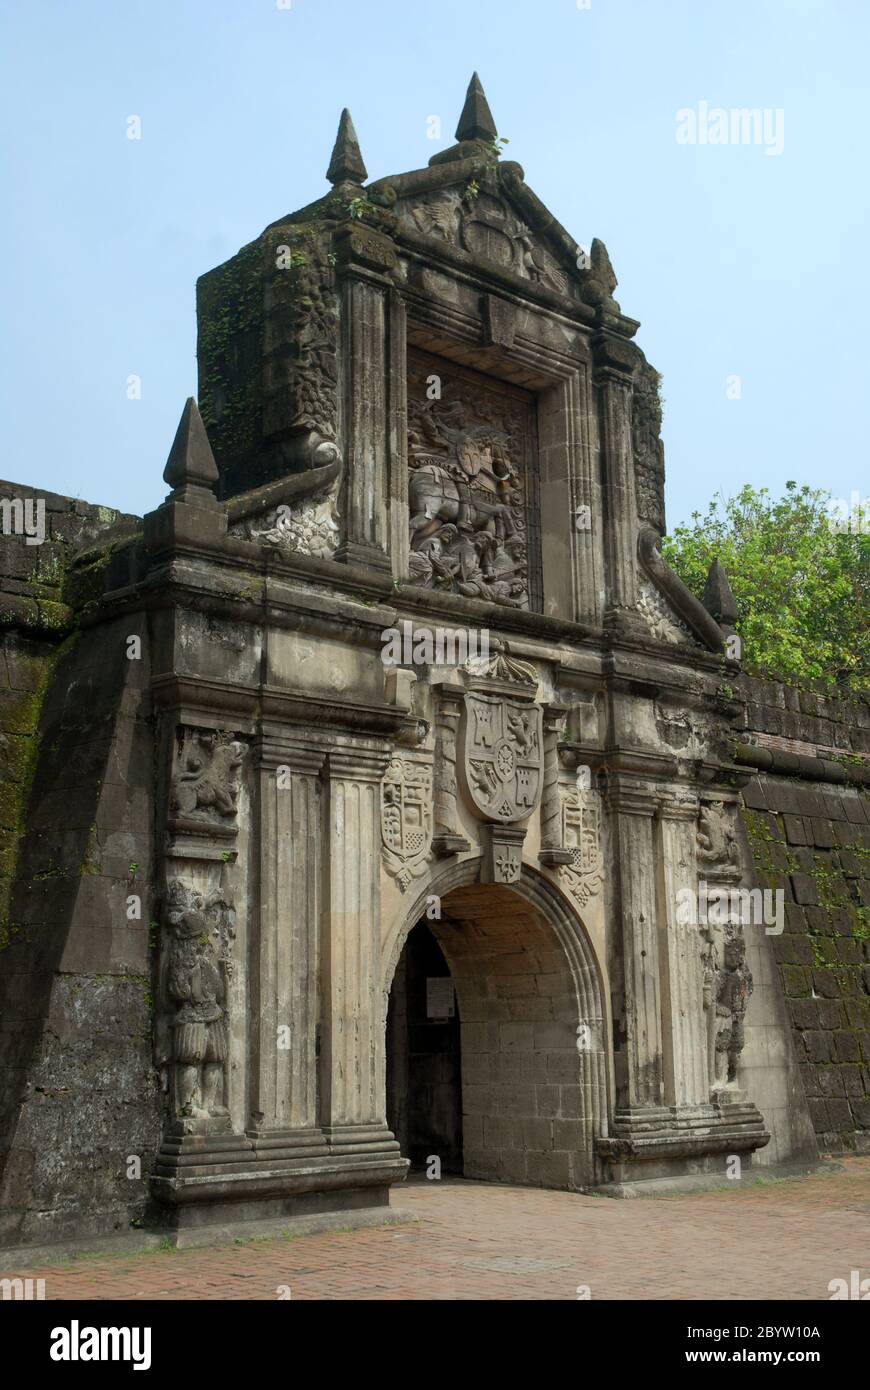 Entrance to Fort Santiago in the Intramuros, Manila, Philippines. Stock Photo